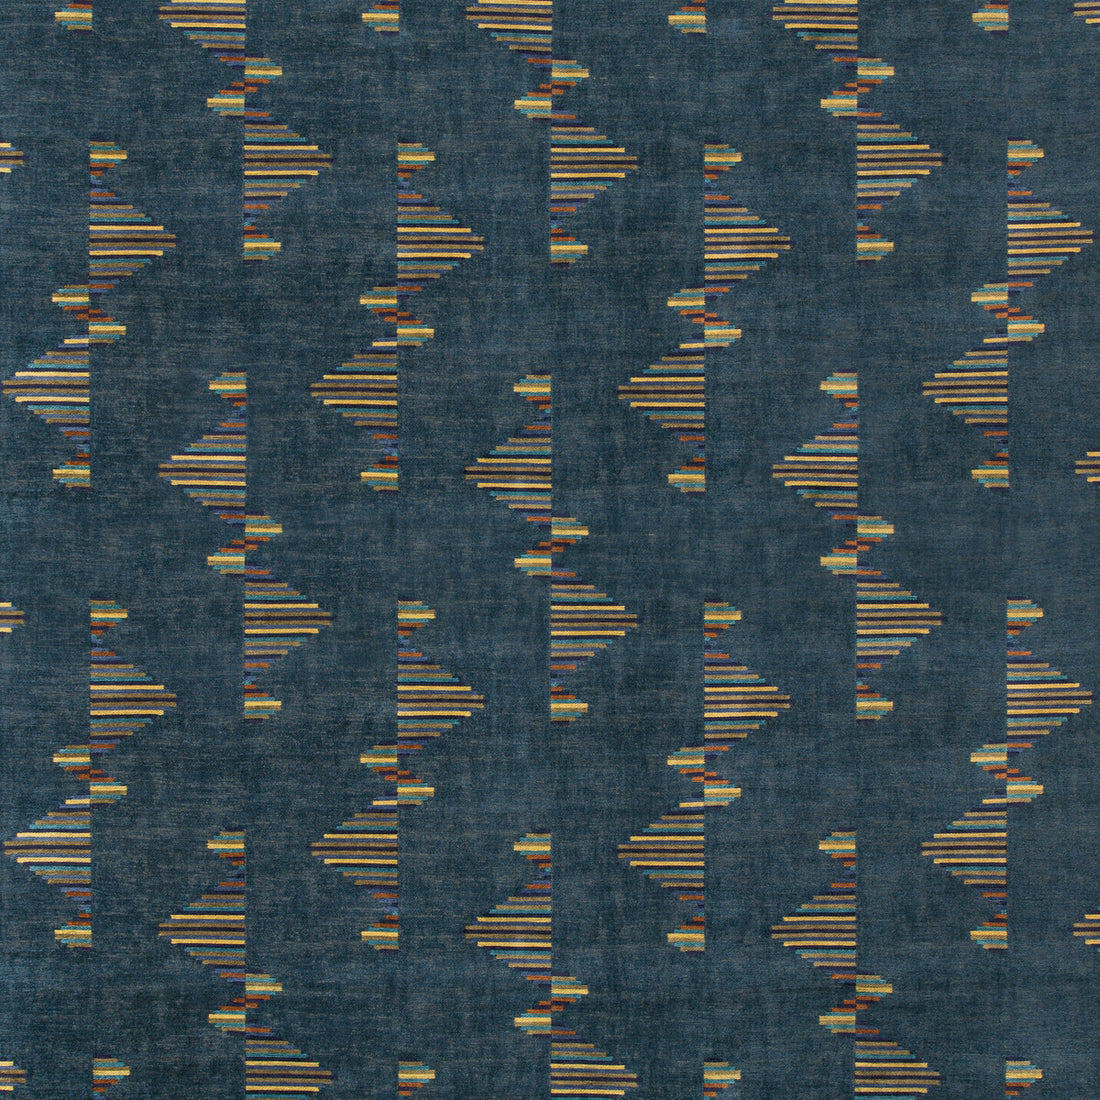 Arcade fabric in marlin color - pattern GWF-3758.354.0 - by Lee Jofa Modern in the Kelly Wearstler V collection